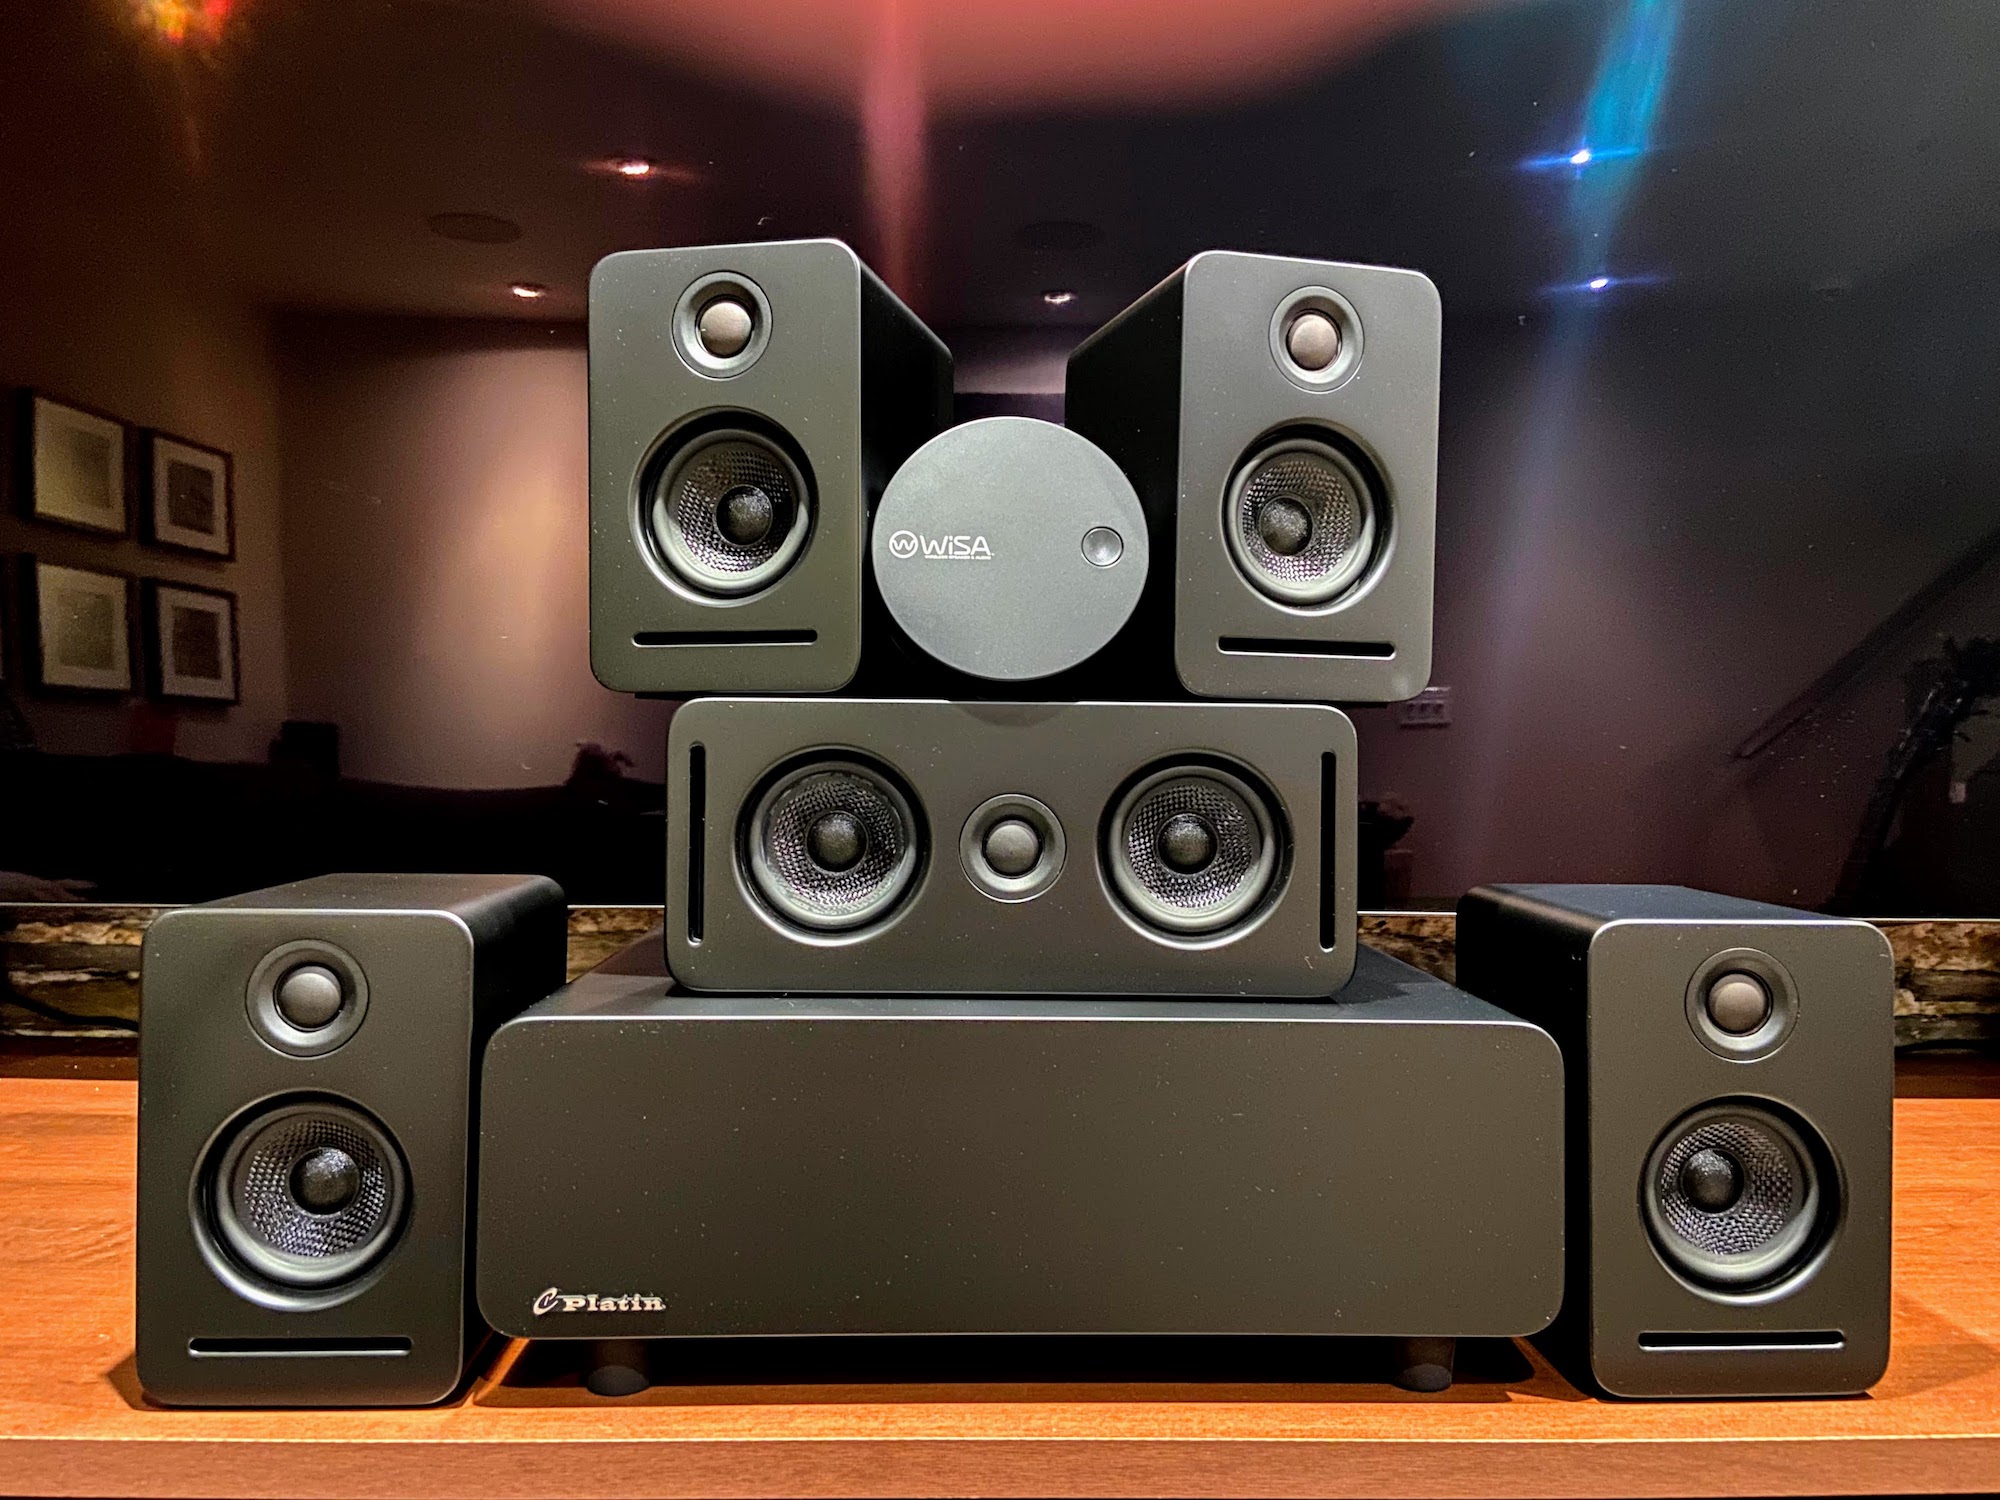 Hands-On With A WiSA Wireless 5.1 Home Theater | Digital Trends